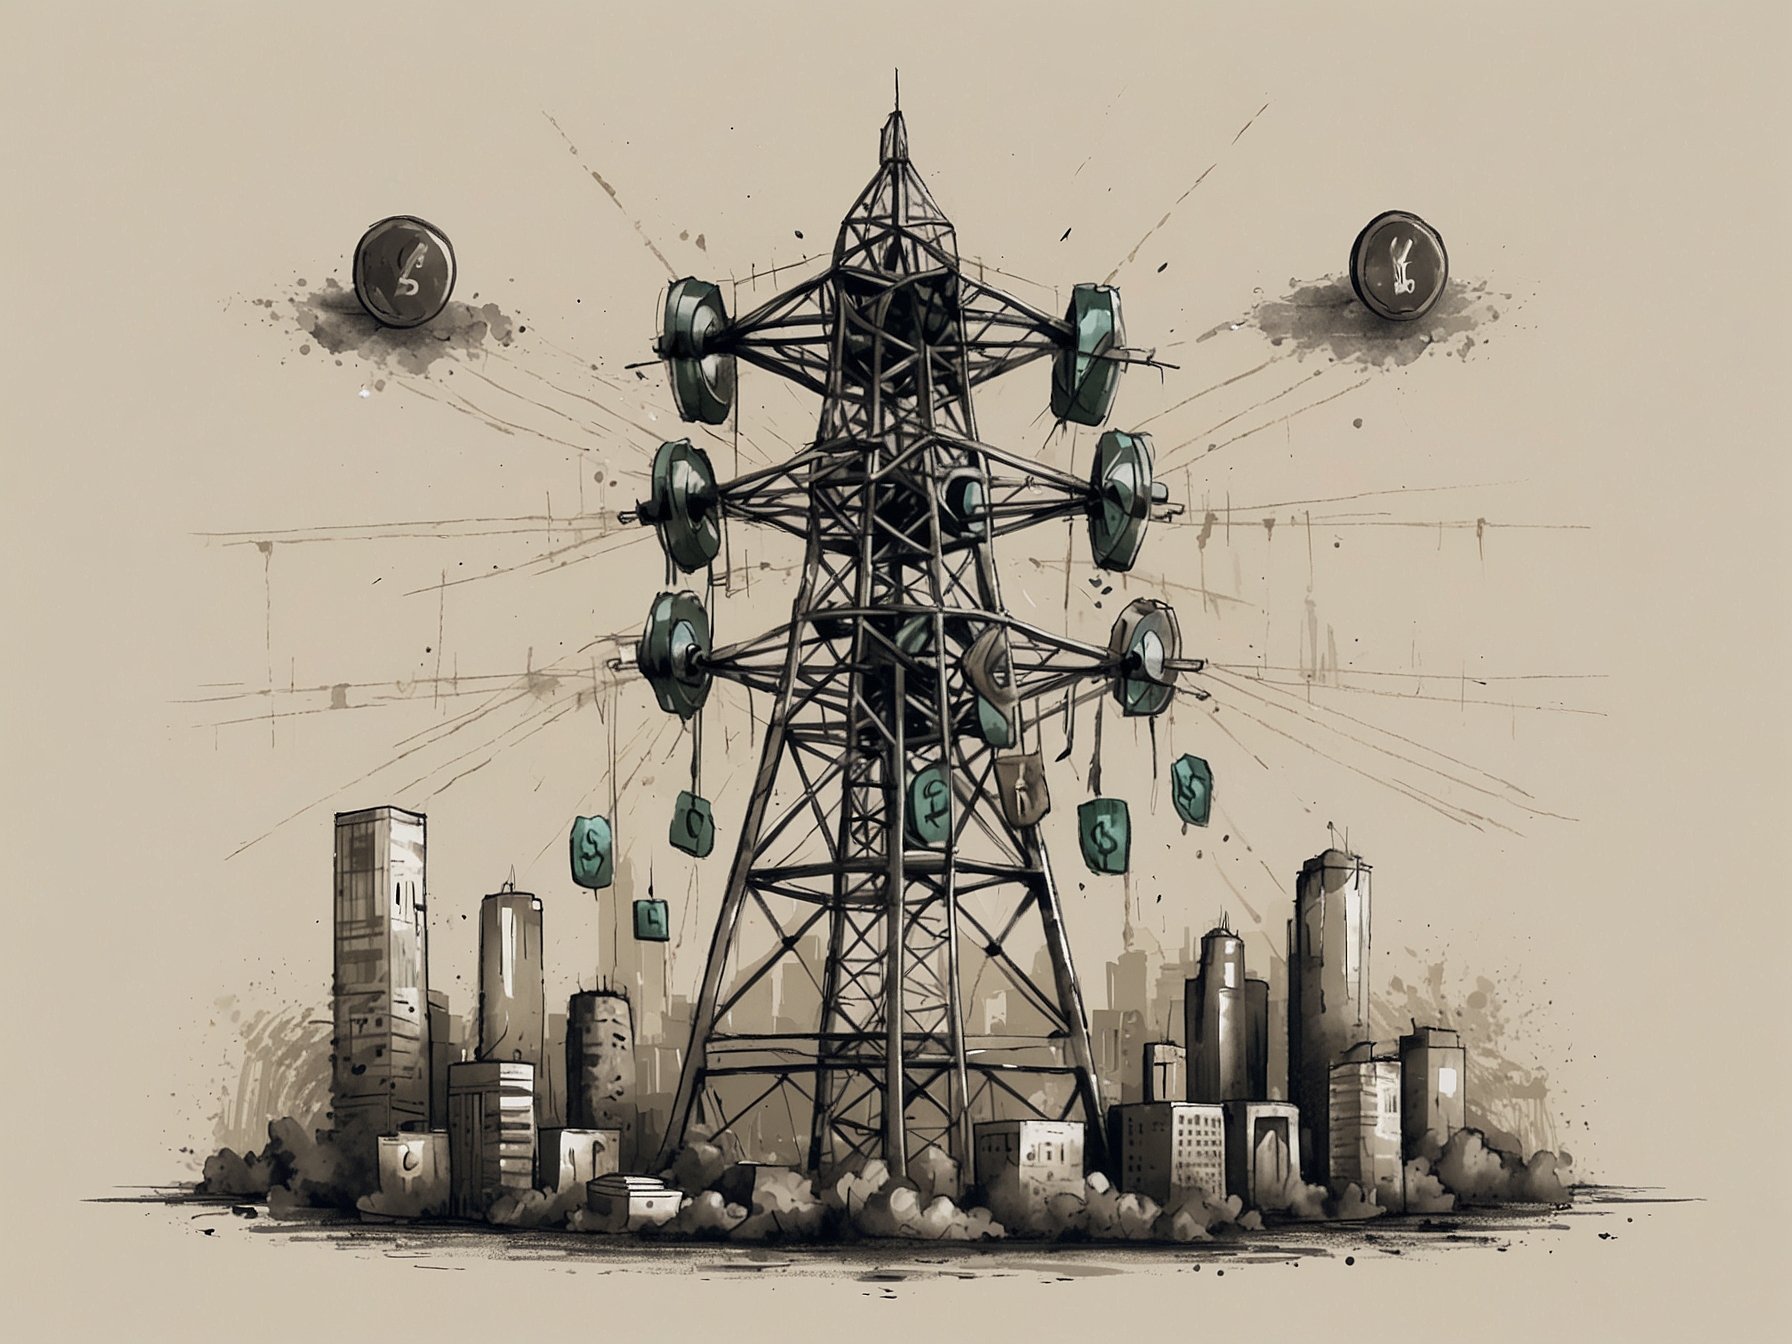 An illustration of a telecom tower with currency symbols around it, representing the increased costs for improving service quality and network infrastructure in India's telecom sector.